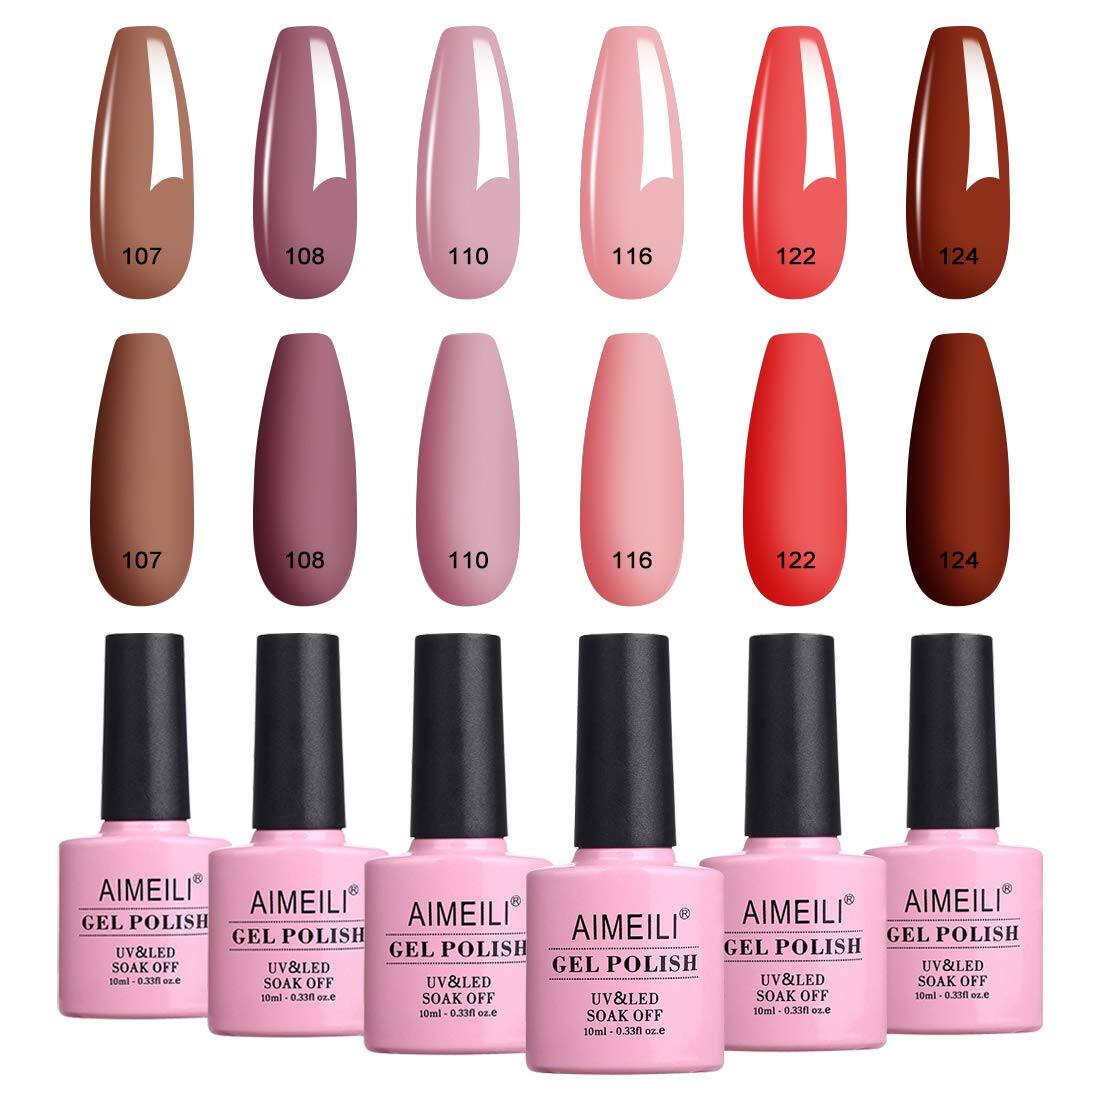 AIMEILI Natural Skin Tone Nude Pink Gel Nail Polish Color Set Of 6pcs X 10ml - Kit 30 for - $8.99 + Free Shipping w/ Amazon Prime or Orders $25+